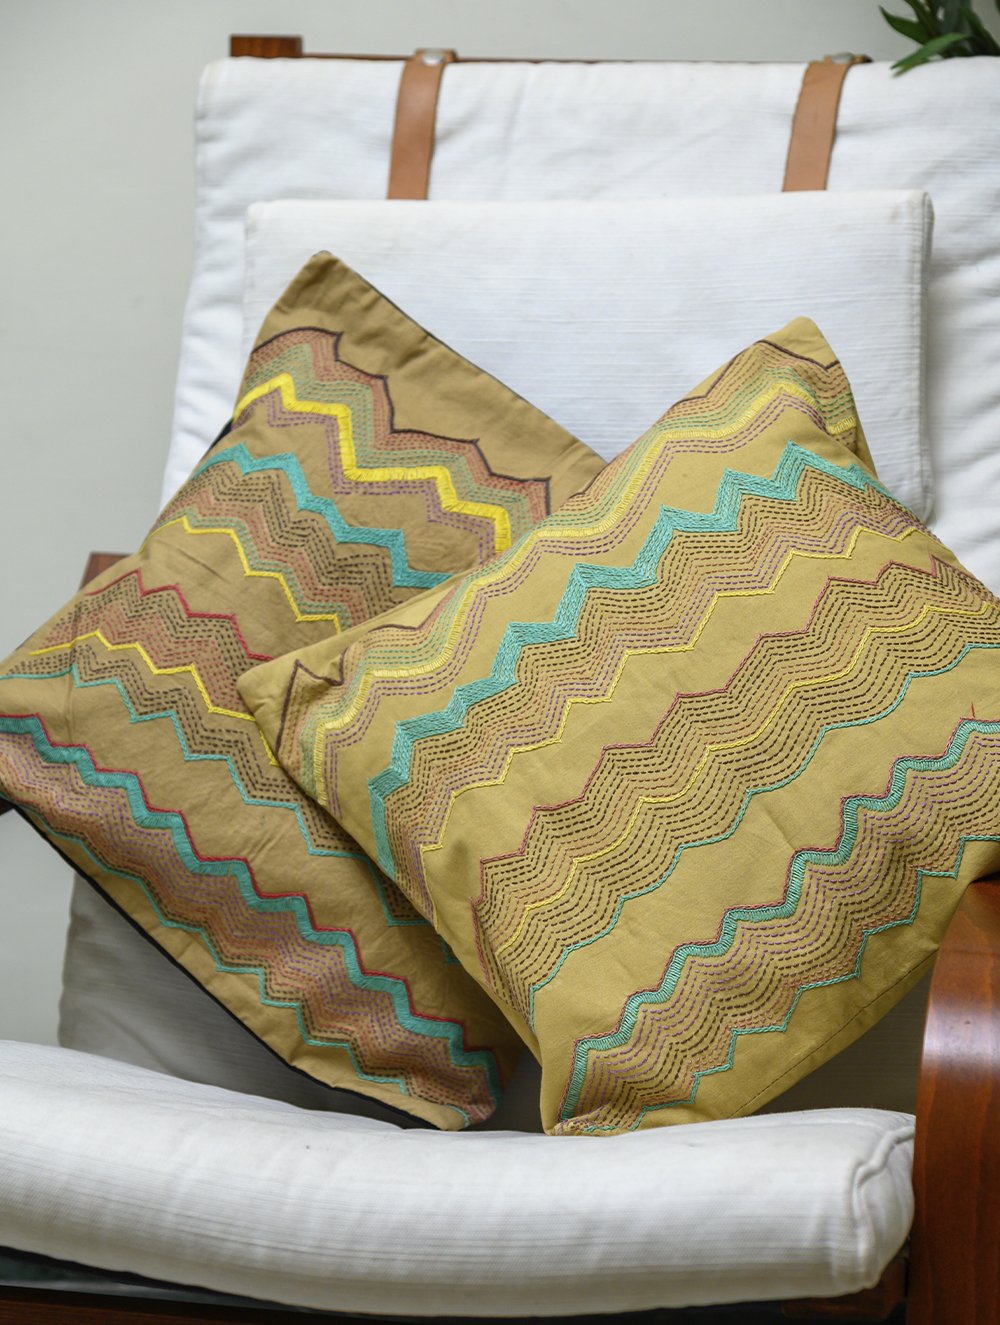 Load image into Gallery viewer, Lambani Tribal Hand Embroidered Cushion Covers - Beige Mist (Set of 2)